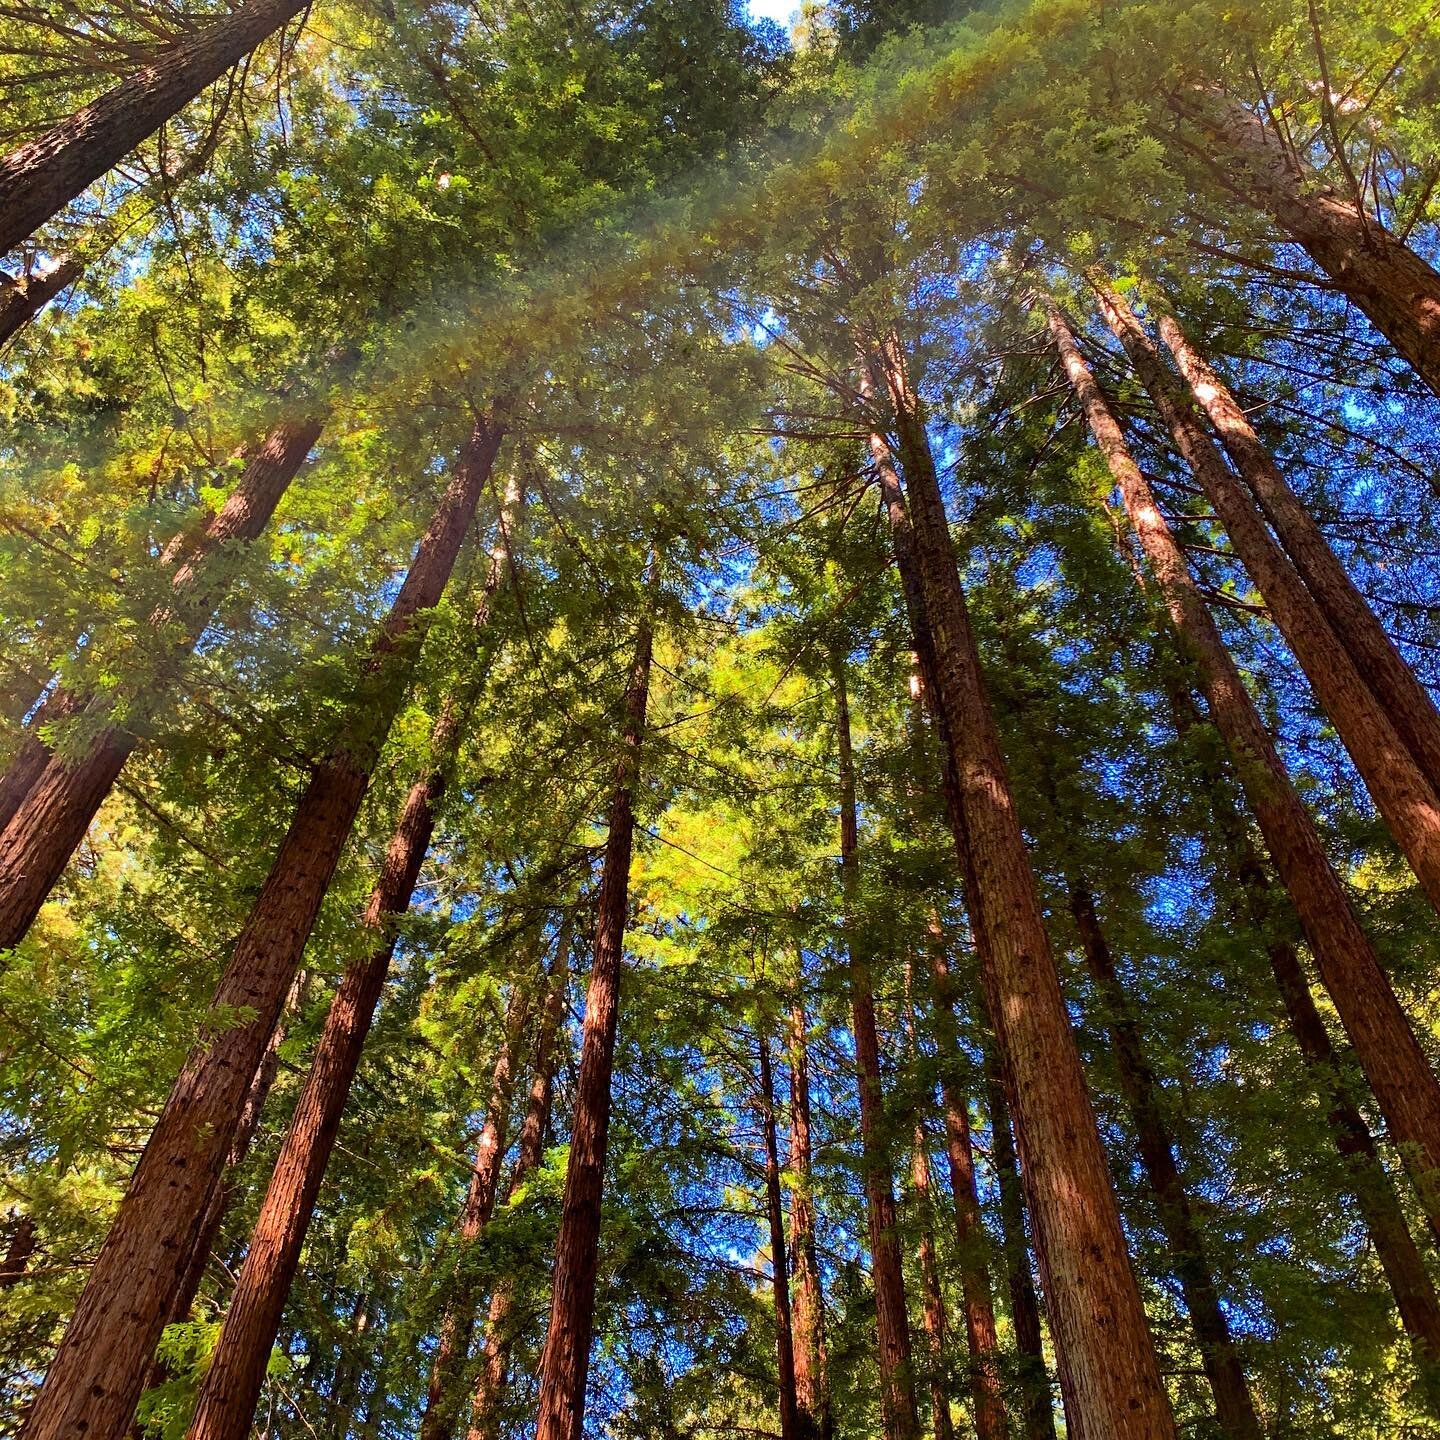 The view from below is sometimes just as good. Can&rsquo;t wait to get back into the trees this weekend #lookup #redwoods #russianriver #bayareatravel #treehugger @thecazzyshack